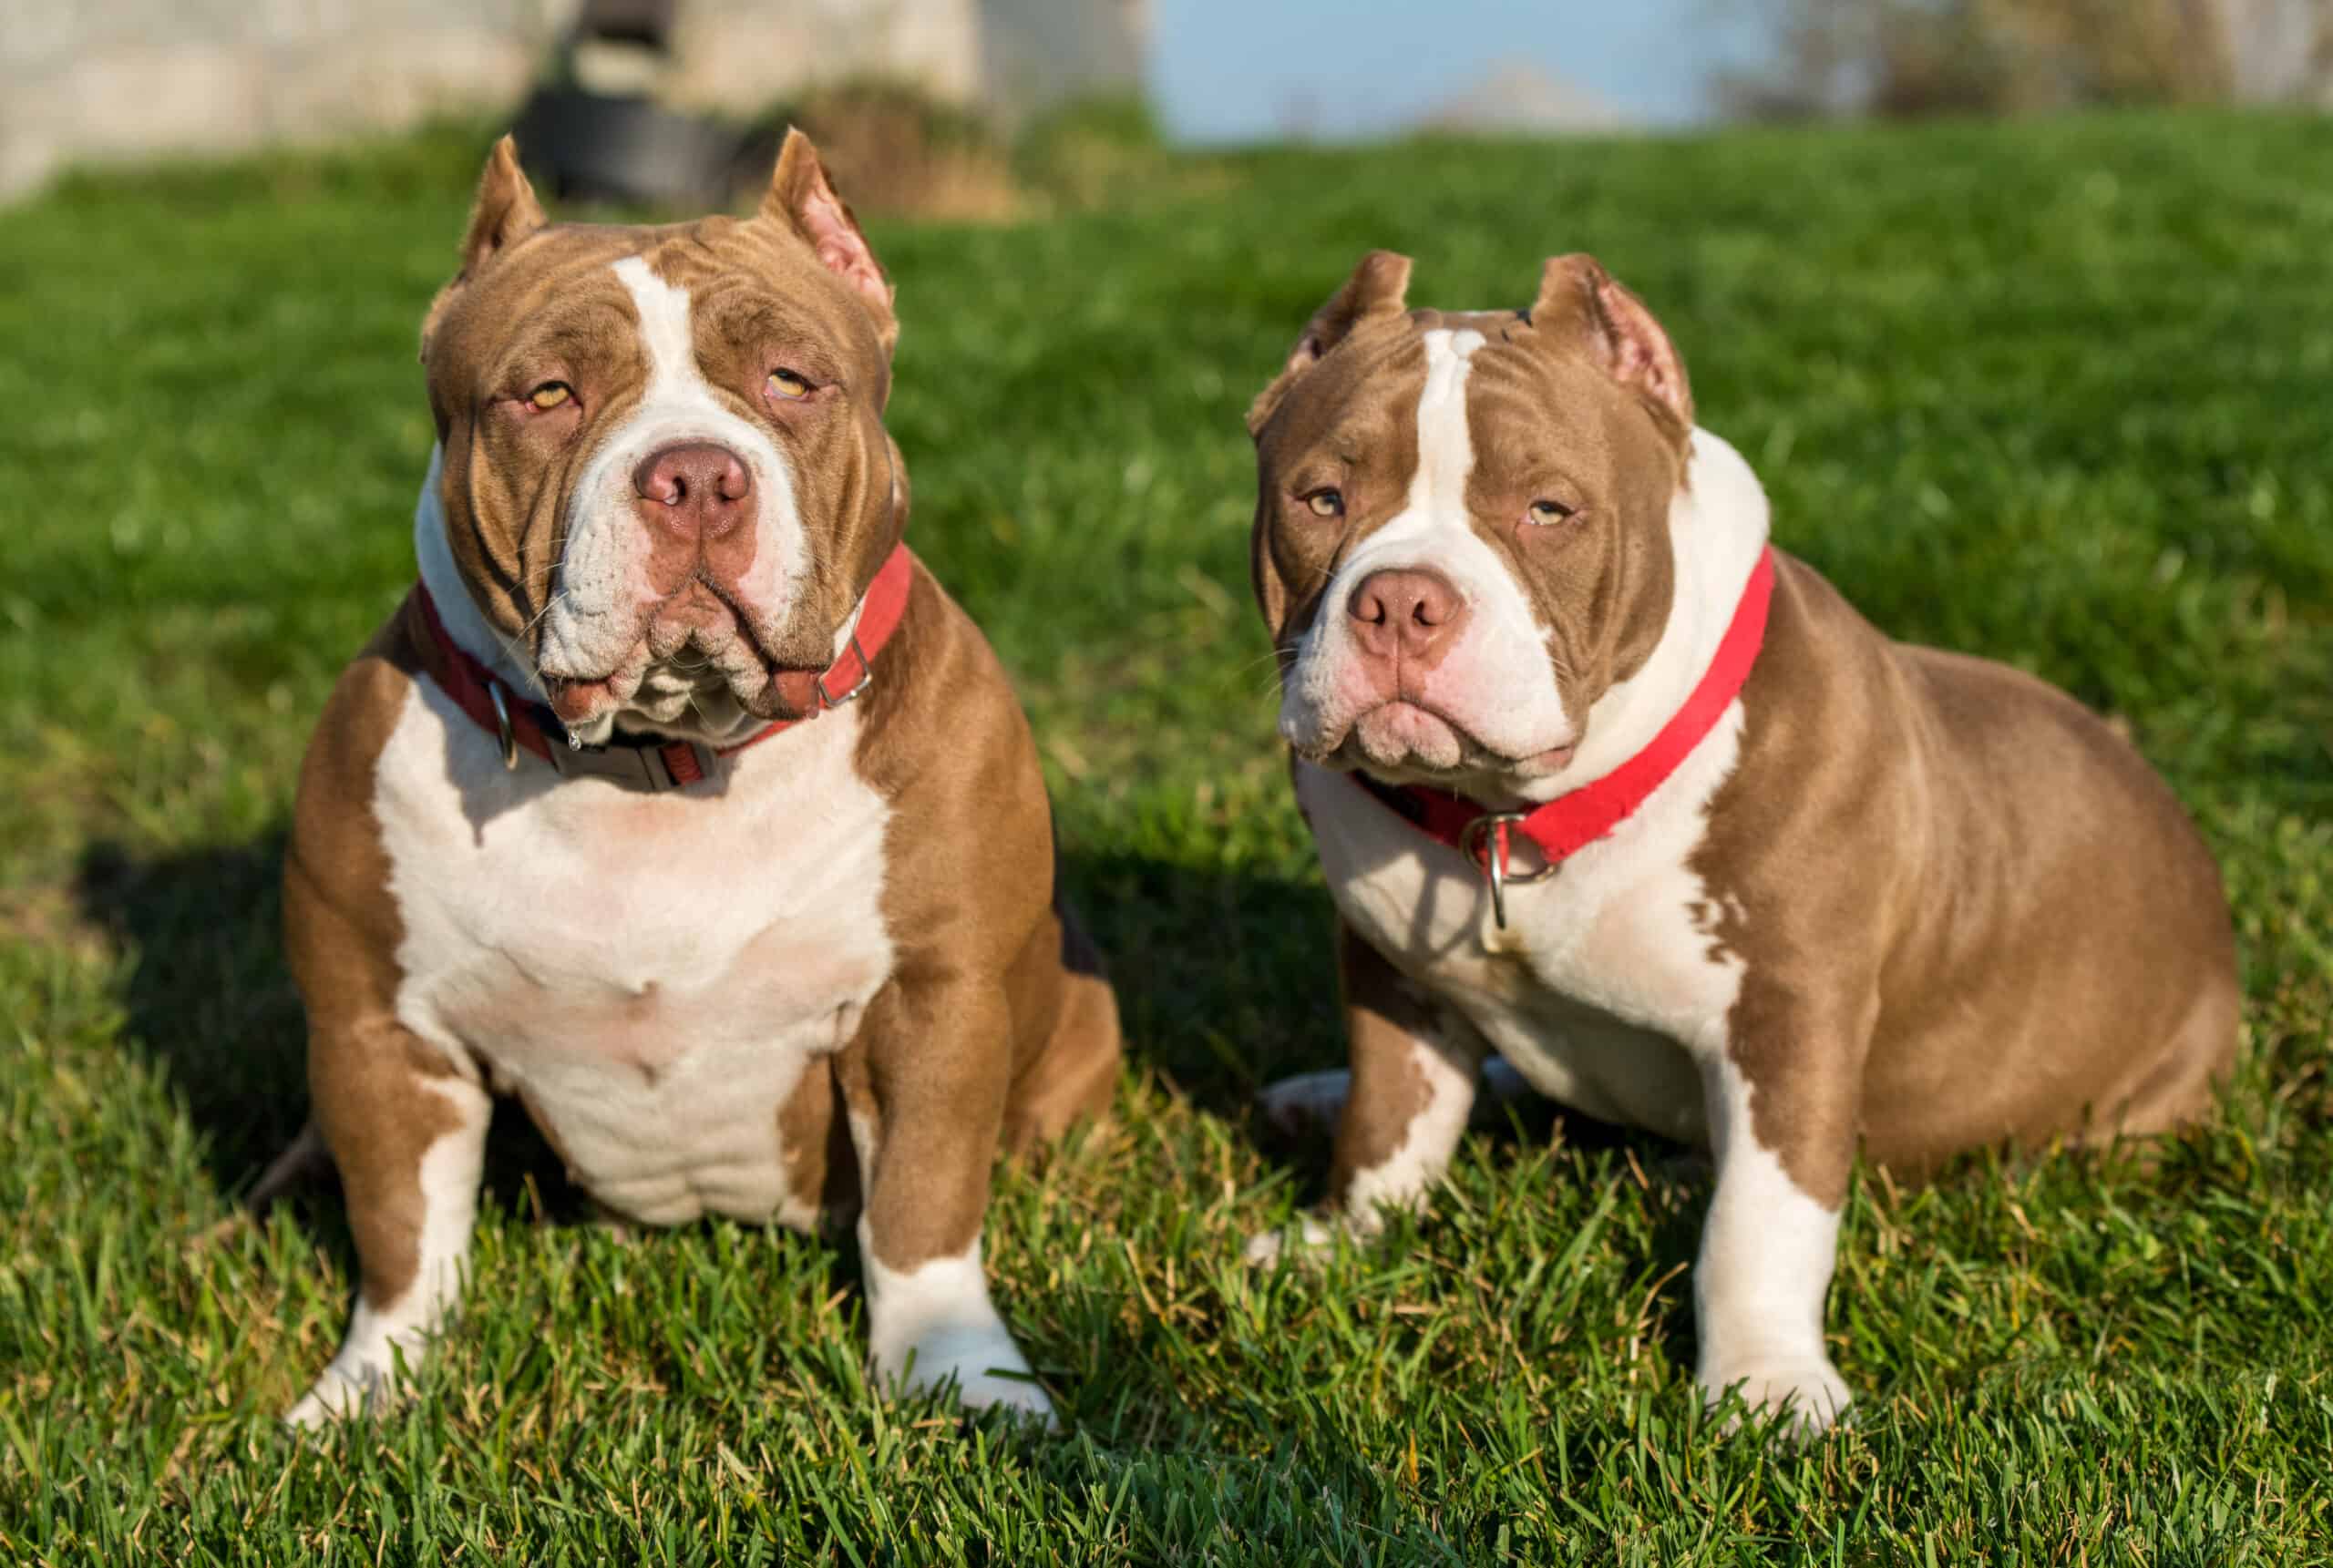 Two Chocolate color American Bully dogs are in the yard.